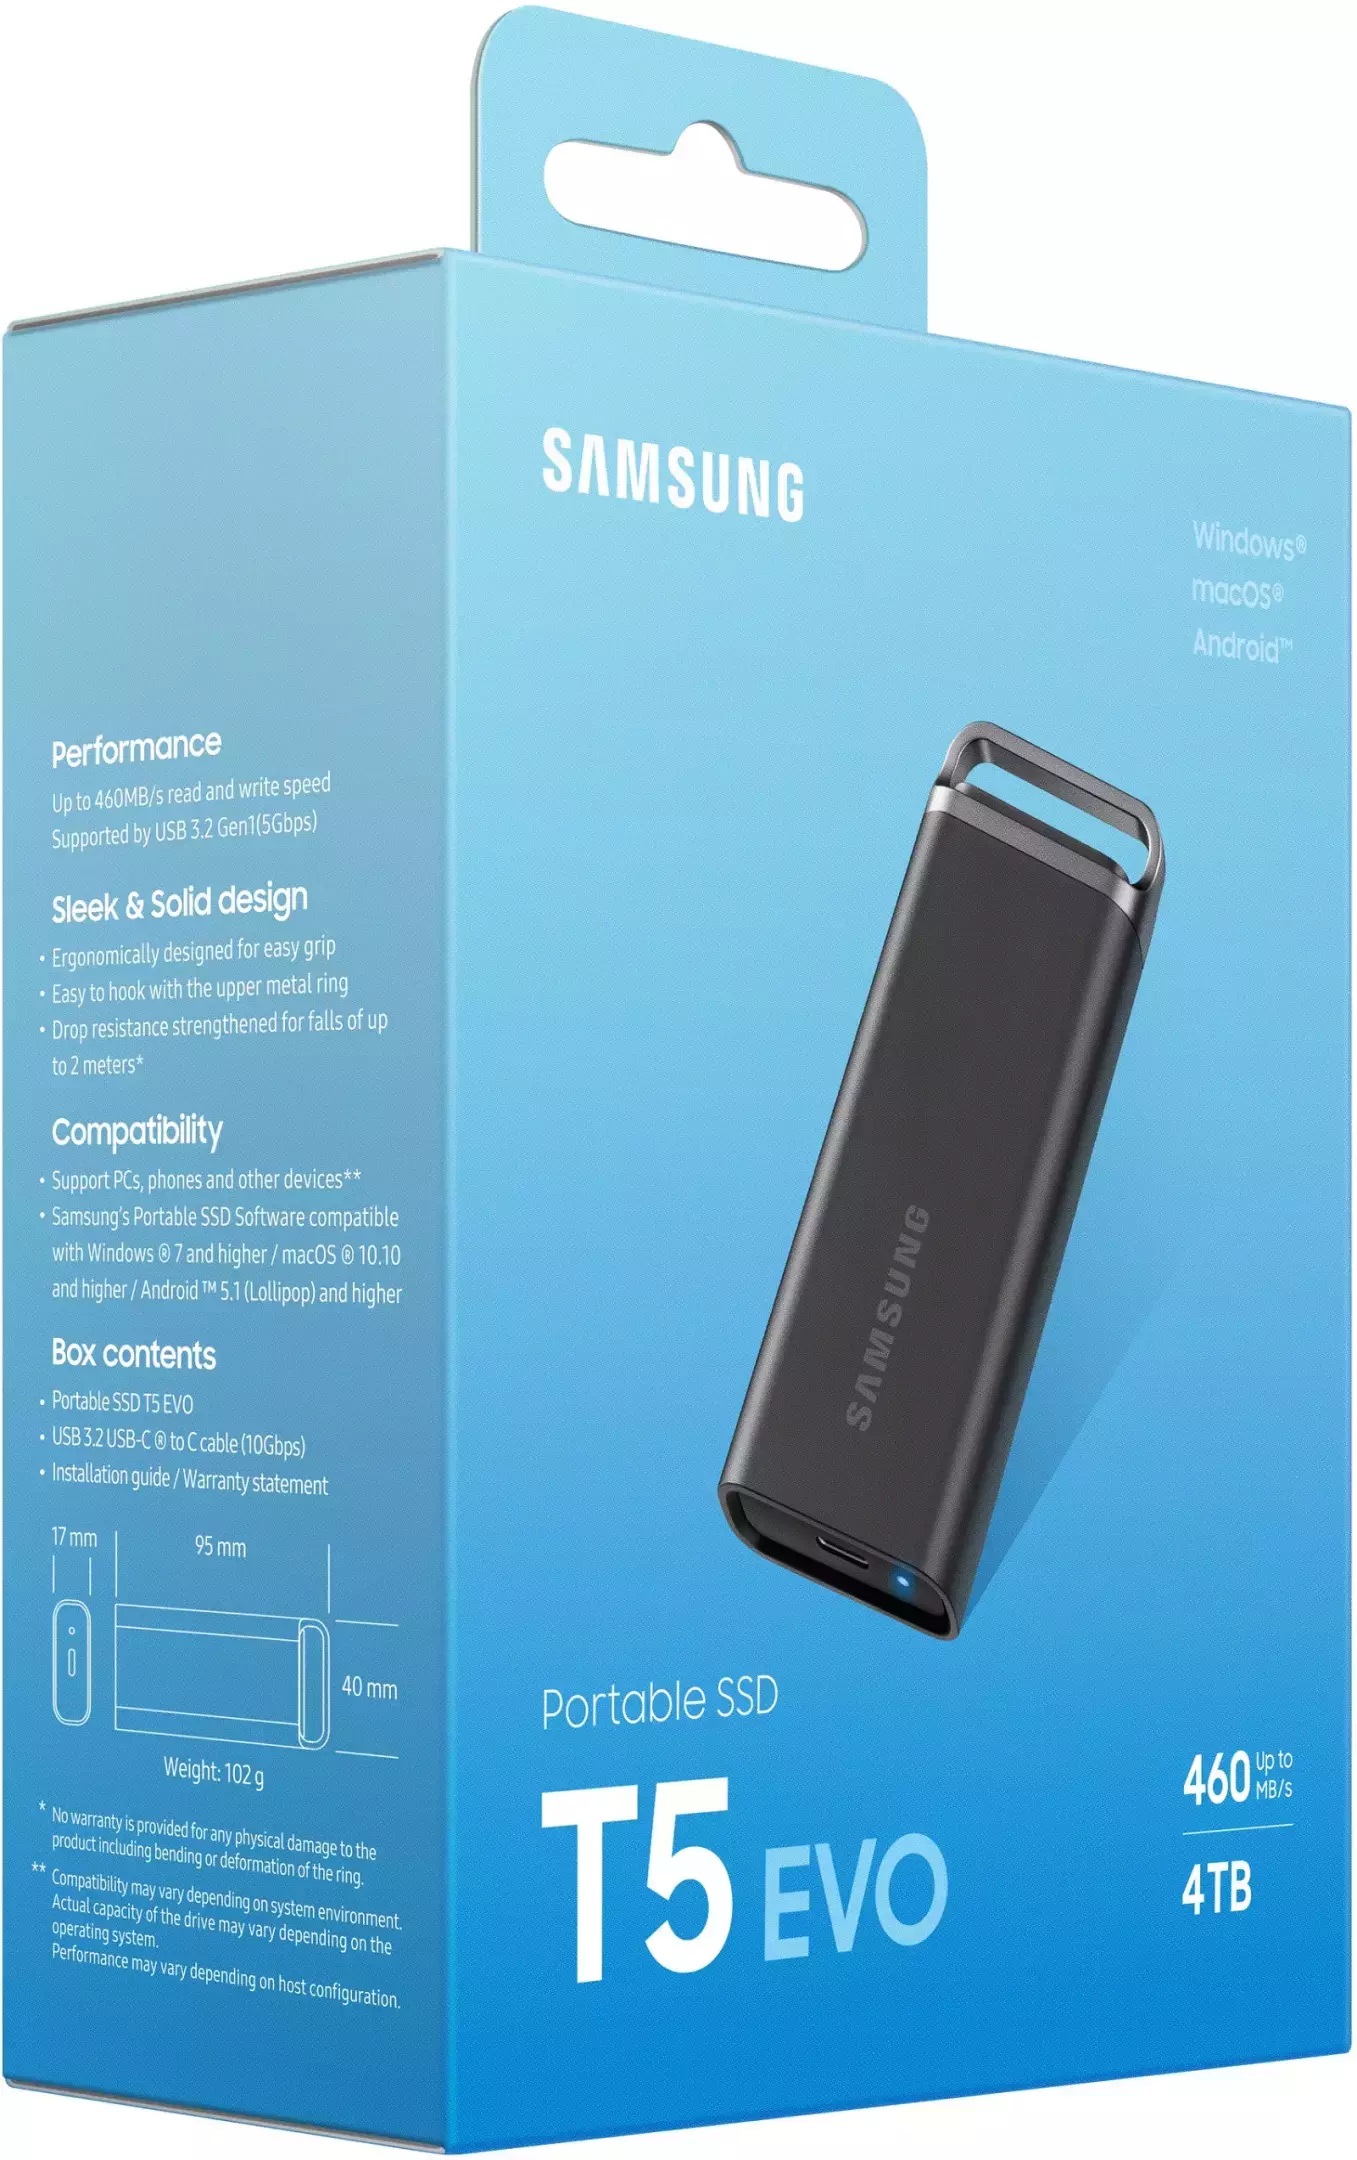 Samsung SSD T5 EVO arrives with up to 8 TB capacity 